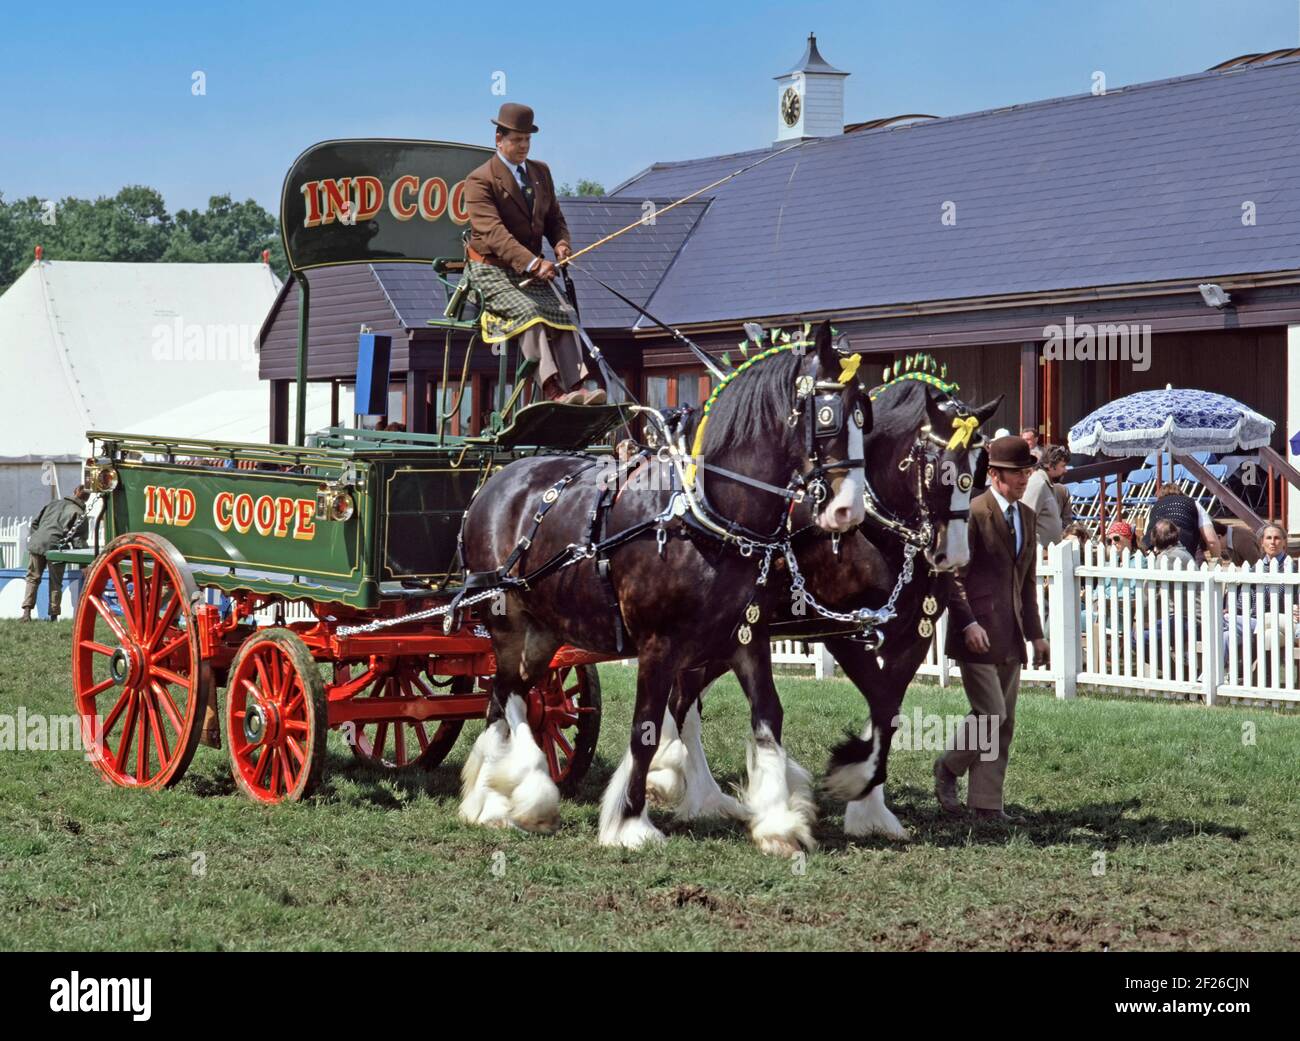 Historical 1985 archive view of Ind Coope brewery dray being pulled by two heavy Draught Shire horses with decorated mane ribbons driver and mate in company uniform parading and promoting the business brand in the main arena at a 1900s Essex County agriculture show event at Great Leighs showground on a blue sky sunny summer 80s day for this way we were archival image near Chelmsford Essex England UK Stock Photo